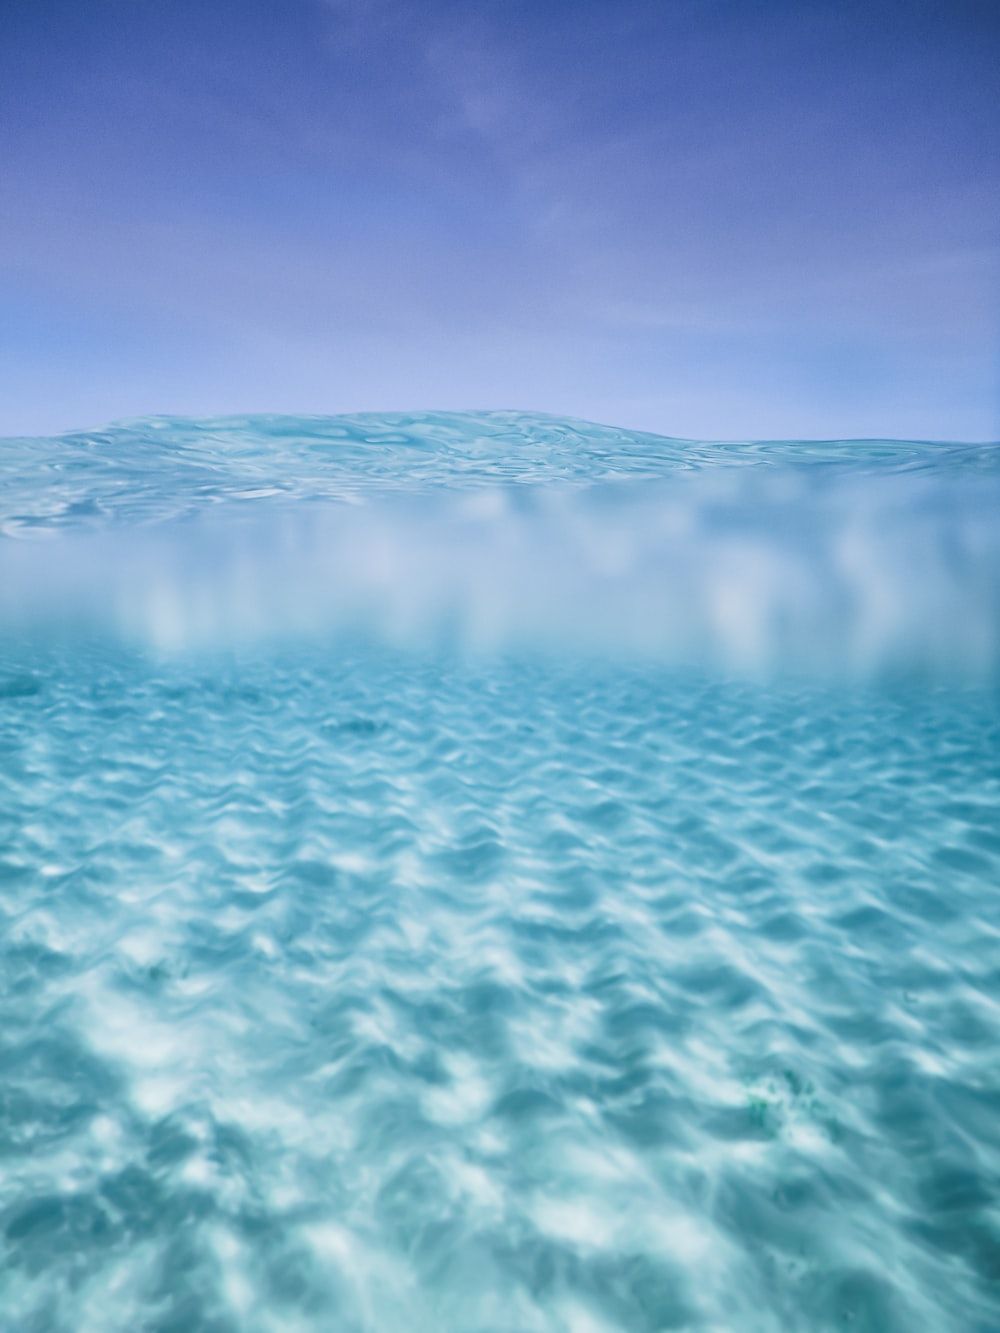 This image is a painting of an ocean scene, divided in half. The top half is clear blue sky, while the bottom half is a gradient of blue to white, representing the ocean floor. The water is depicted with ripples on the surface. - Underwater